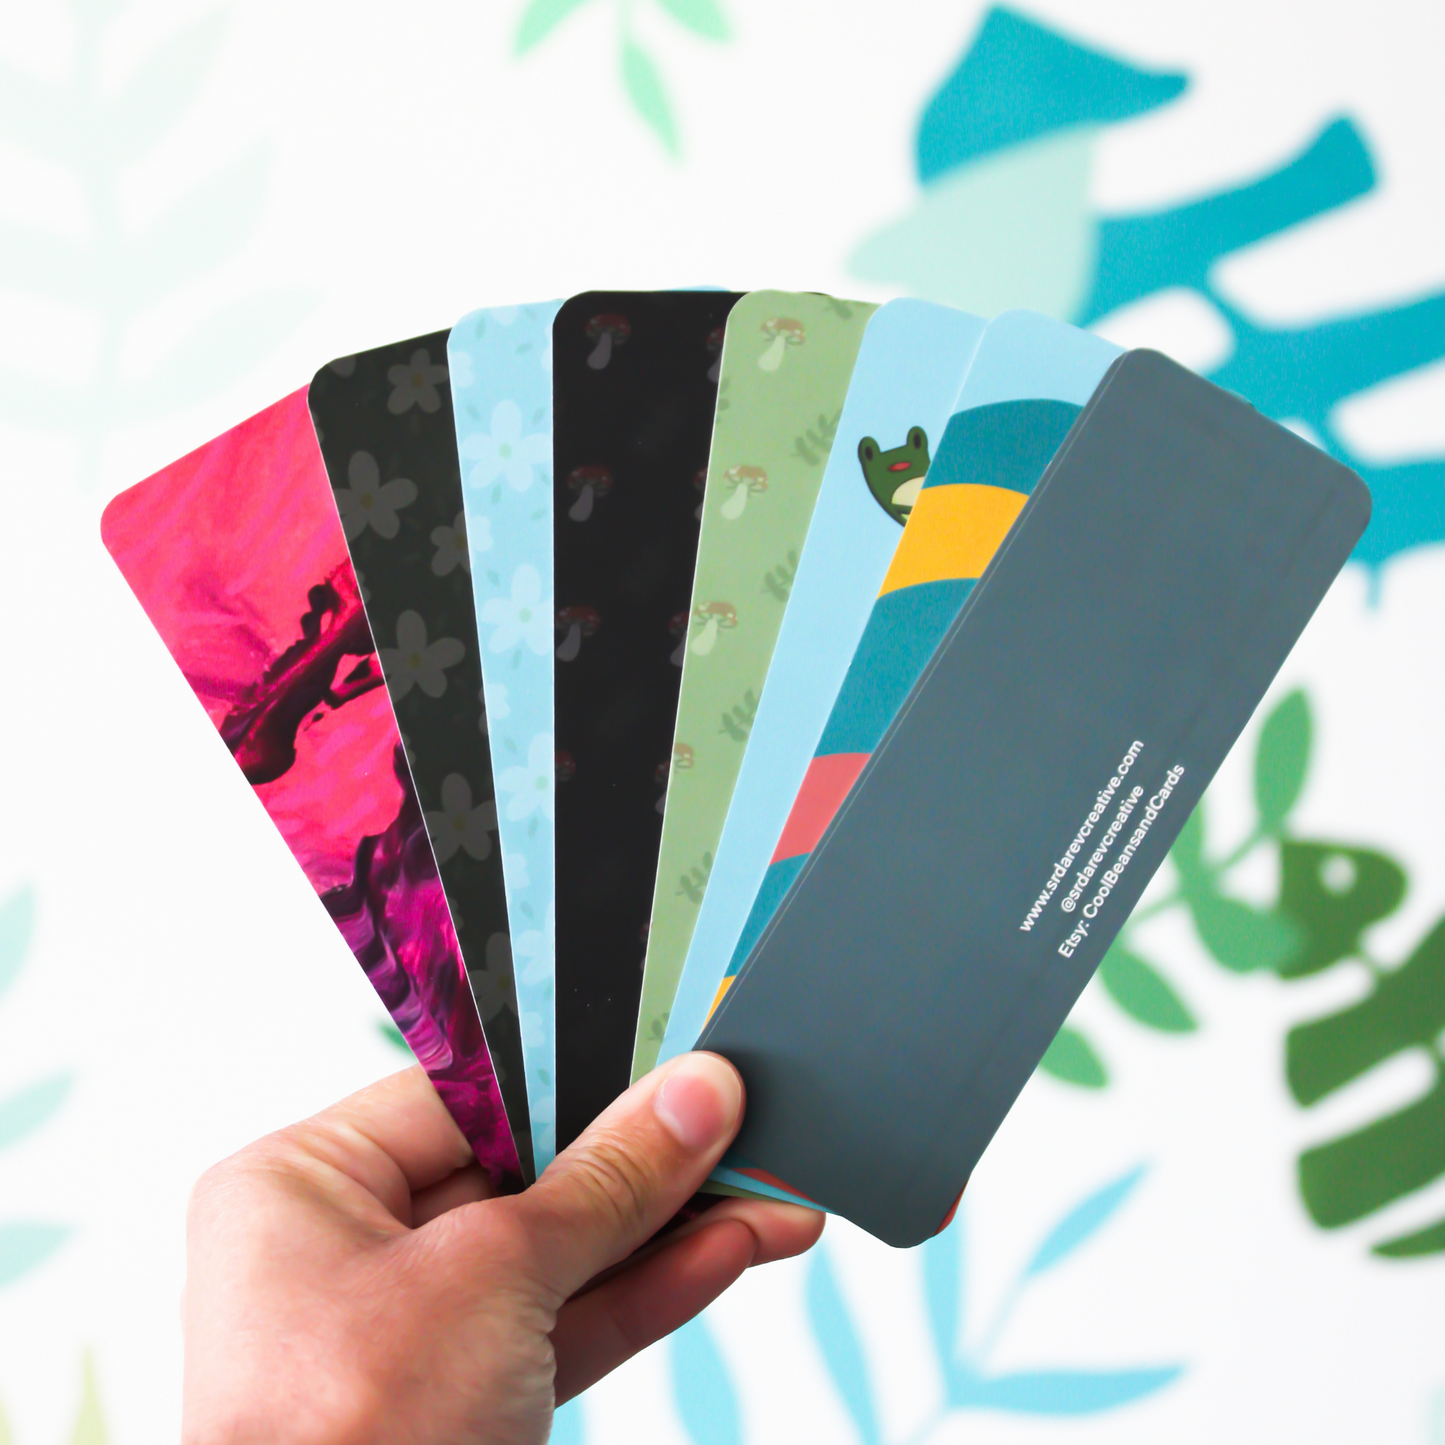 A hand holding the backside of 8 different bookmarks in a fan formation. The background is a blurred leaf pattern.